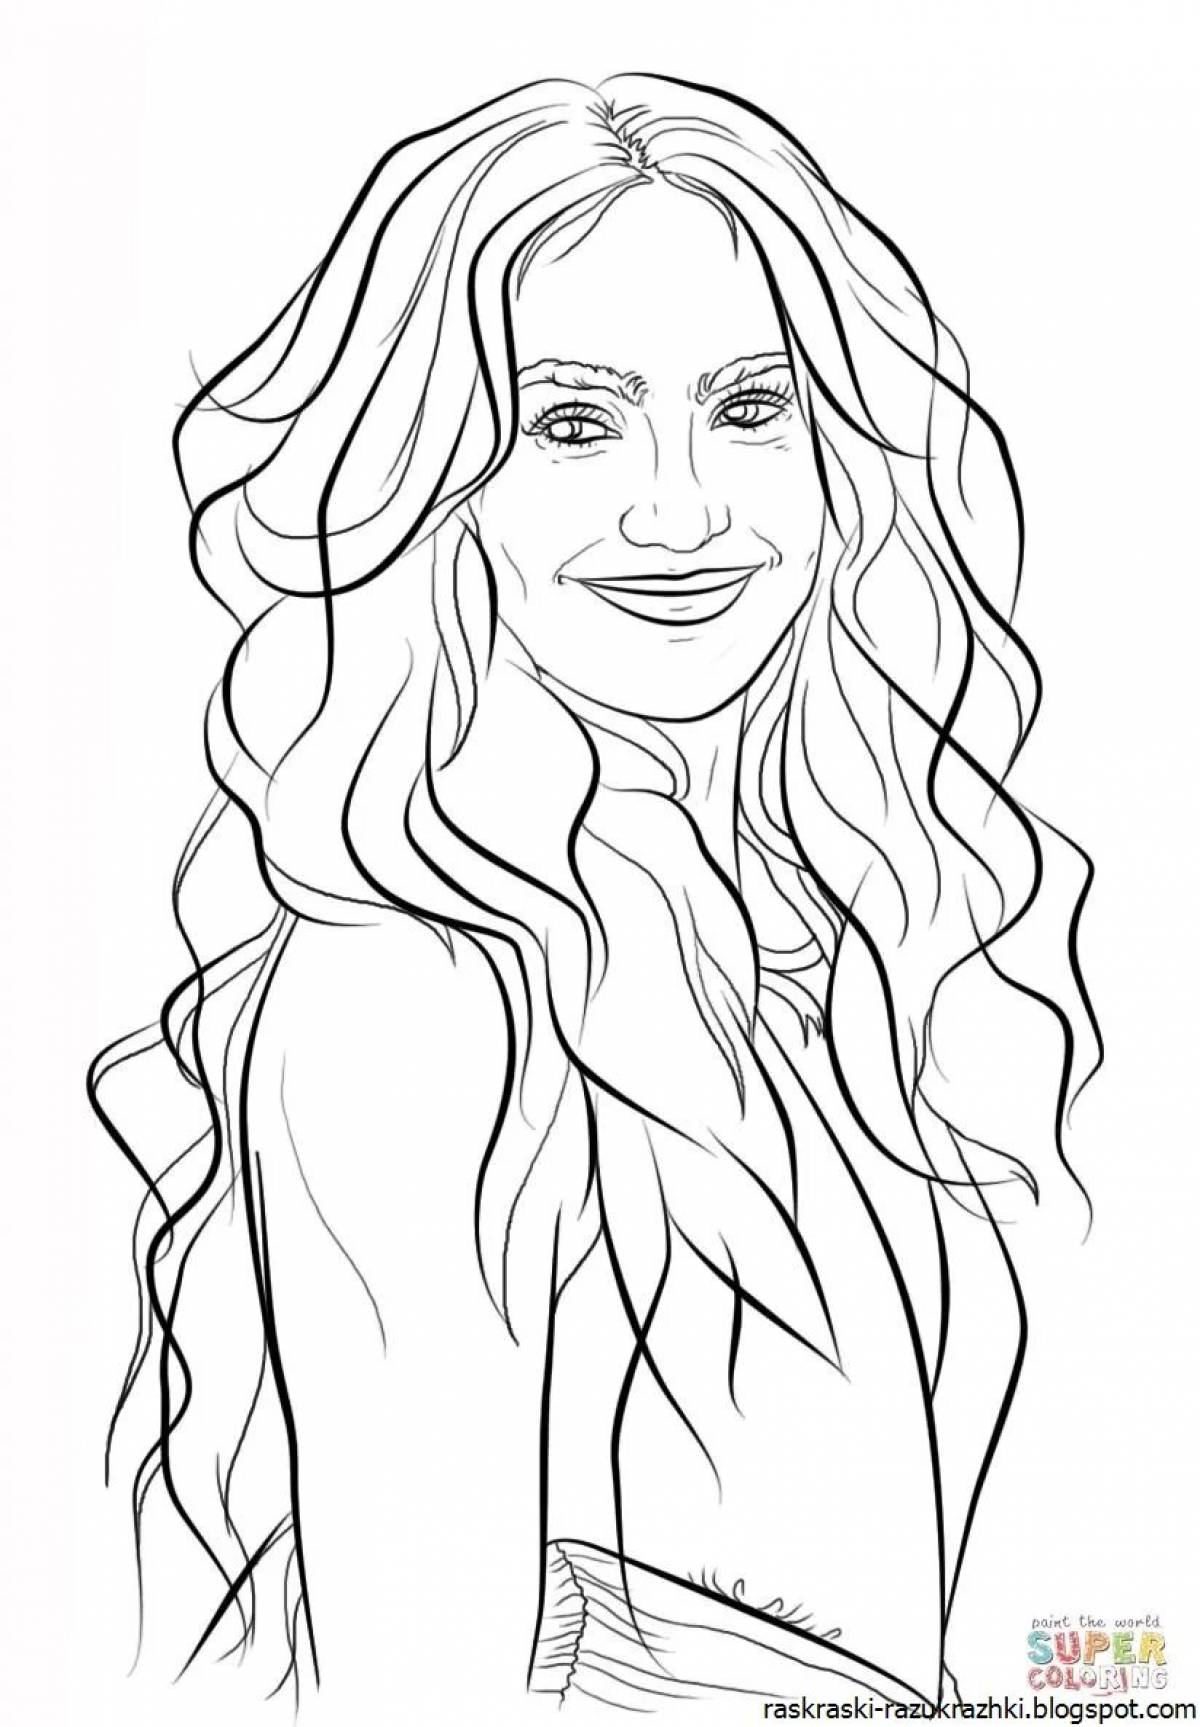 Celebrity coloring pages